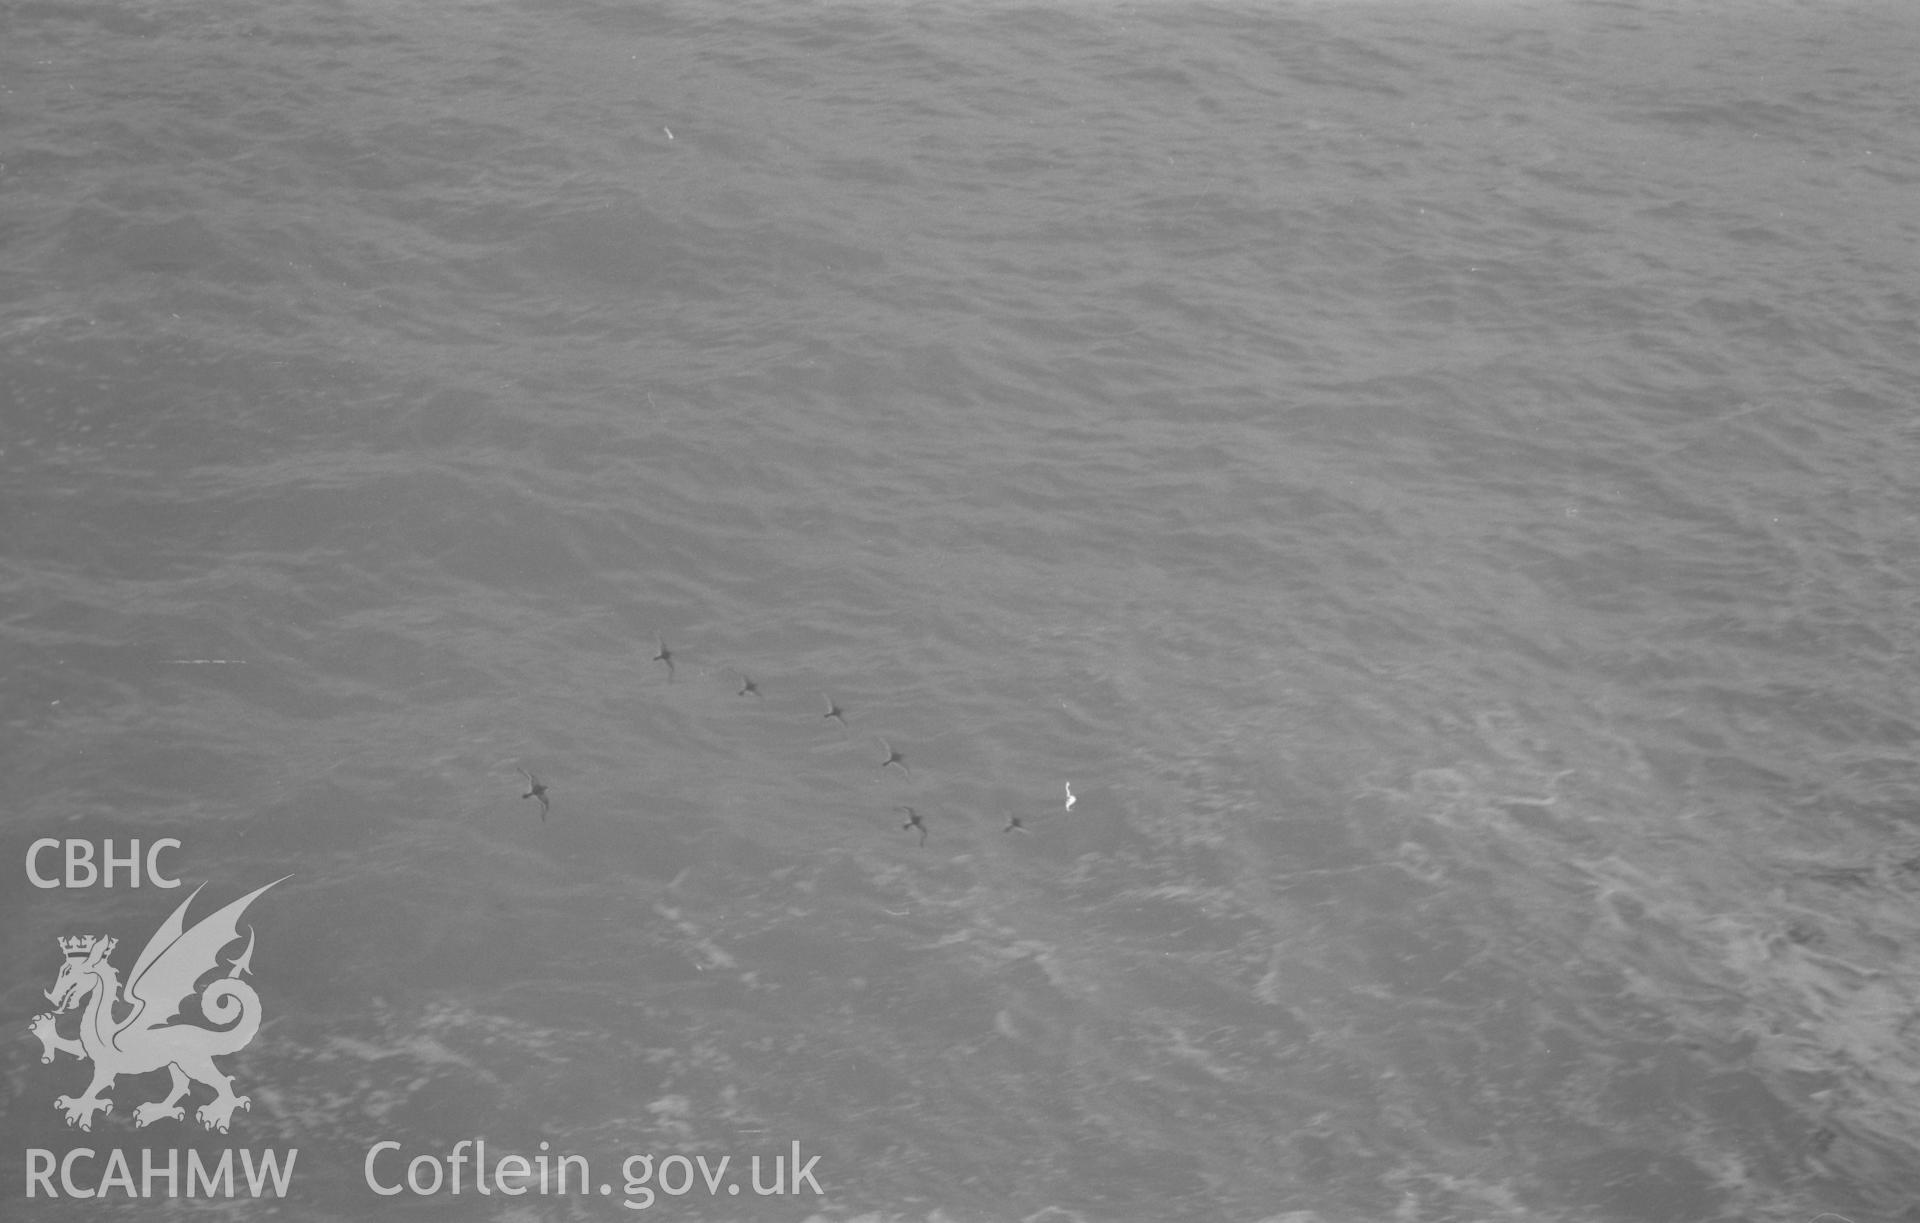 Black and White photograph showing purple sandpipers on the promenade by the caste at Aberystwyth, at high tide. Photographed by Arthur Chater in December 1961, from Grid Reference SN 579 816.